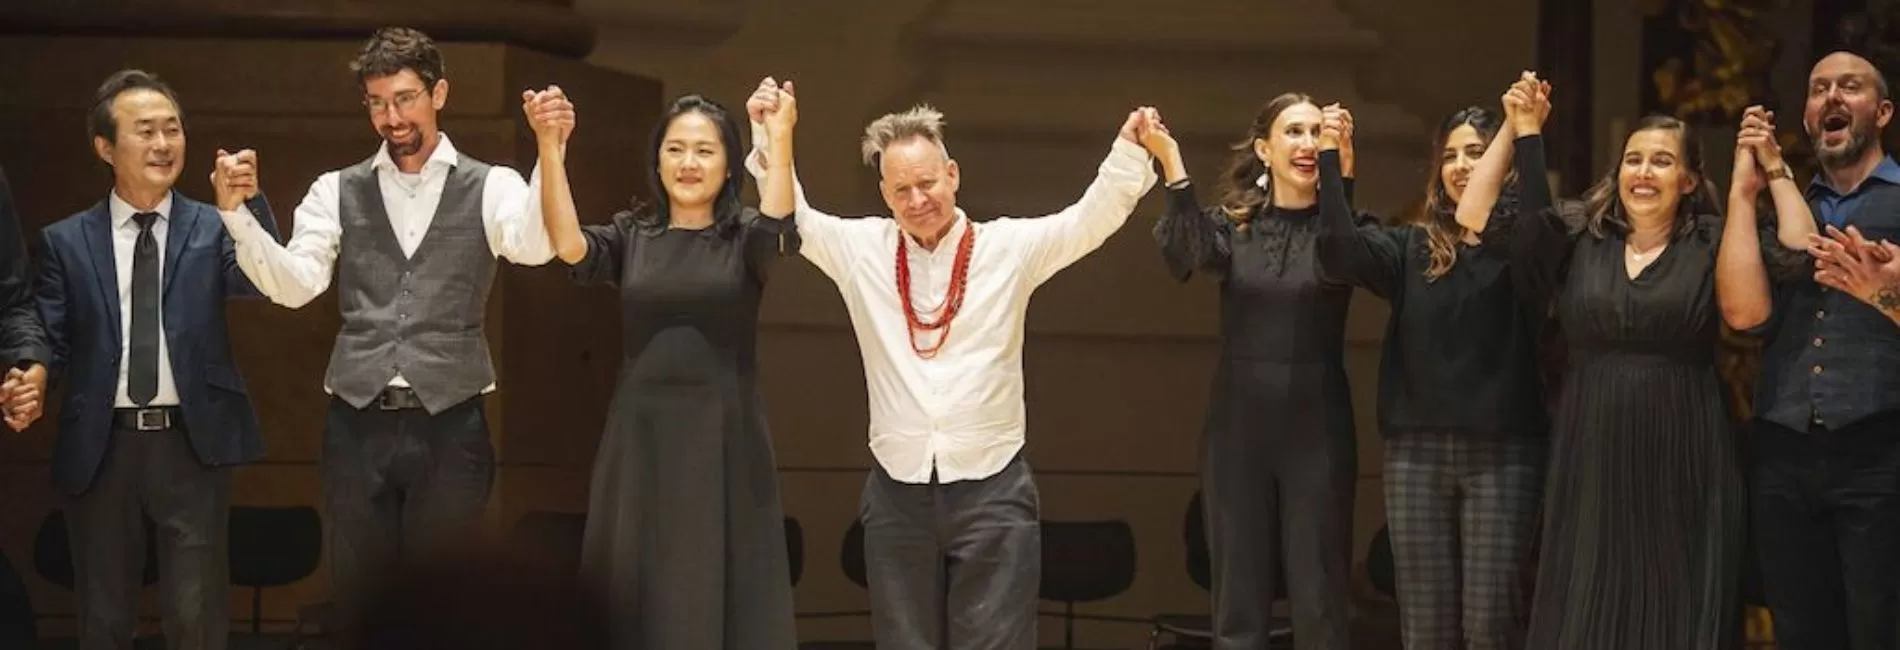 Opera Online Salzburg - Peter Sellars stages Renaissance funeral music with reverence and deliberation